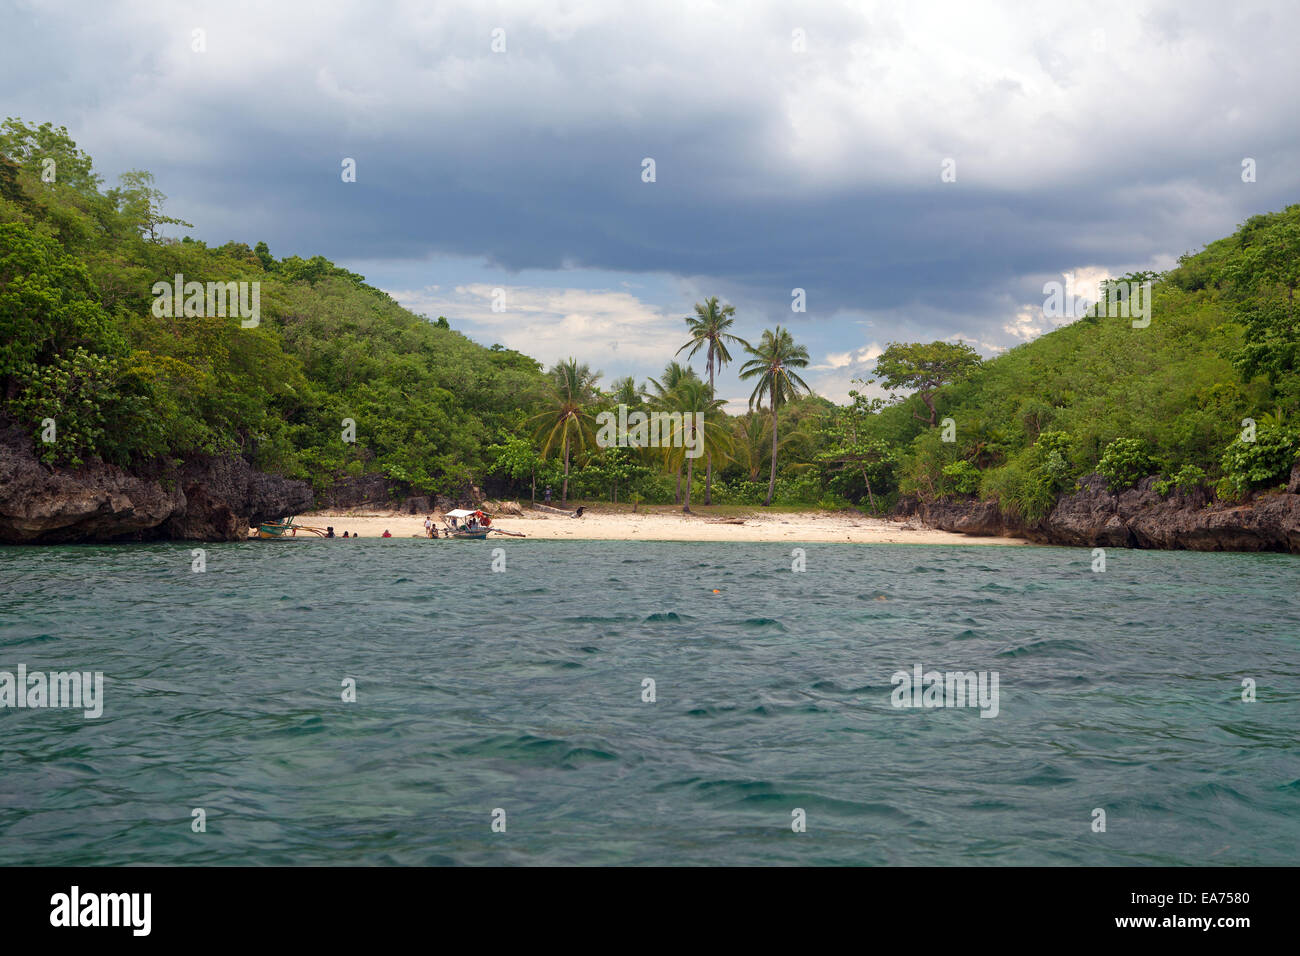 A Filipino tourist boat approaches one of hundreds of remote island beaches in the Guimaras Island Group, Panay Strait, Philippines. Stock Photo